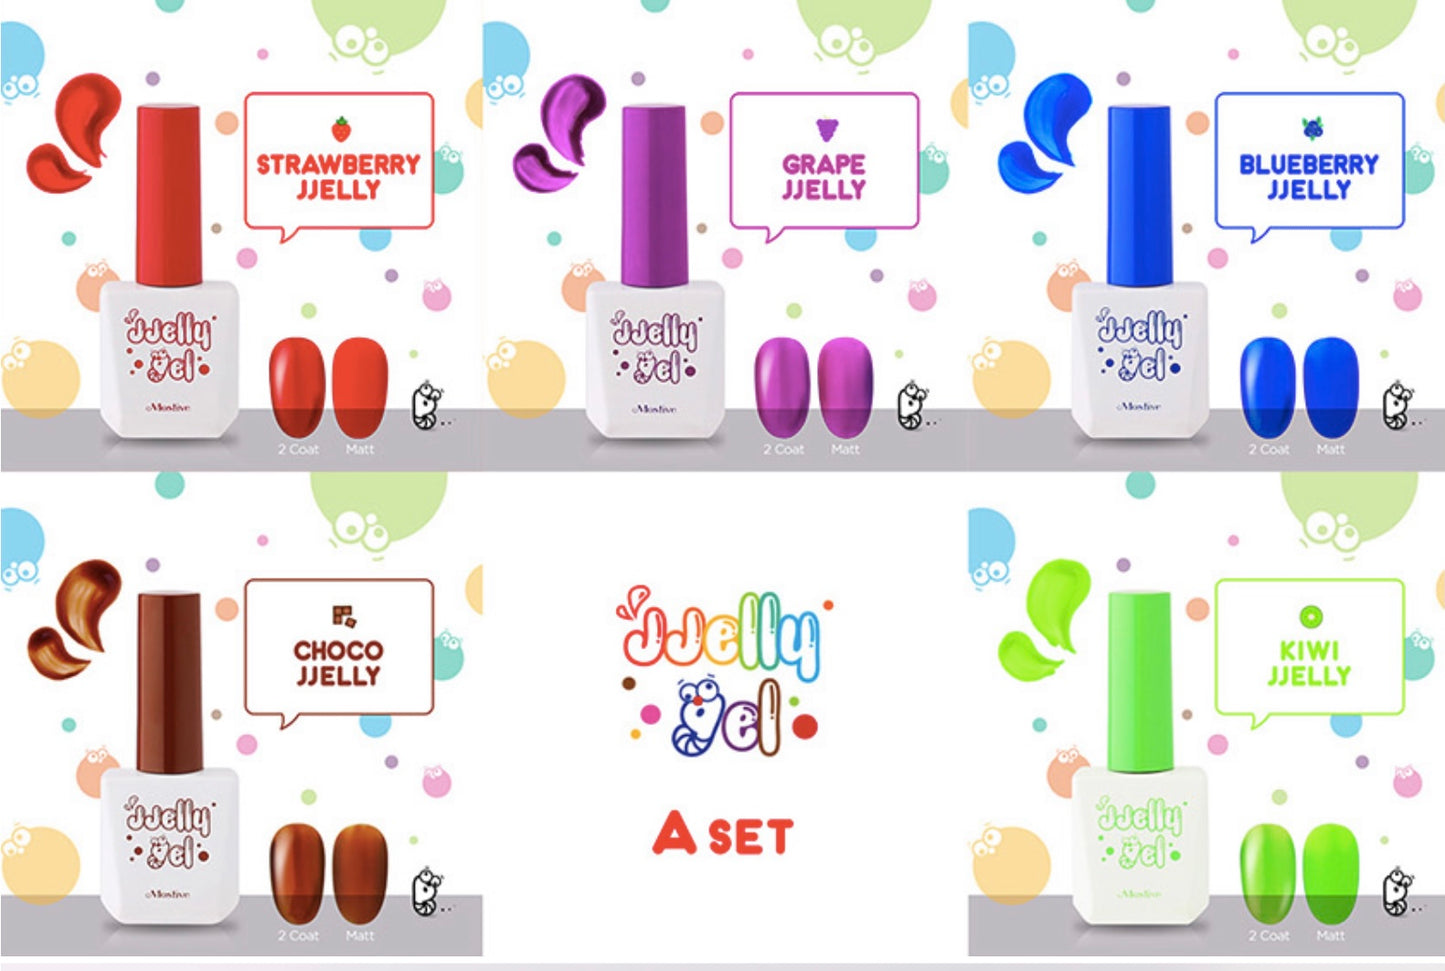 MOSTIVE Jjelly gel 10pc collection - Australia only